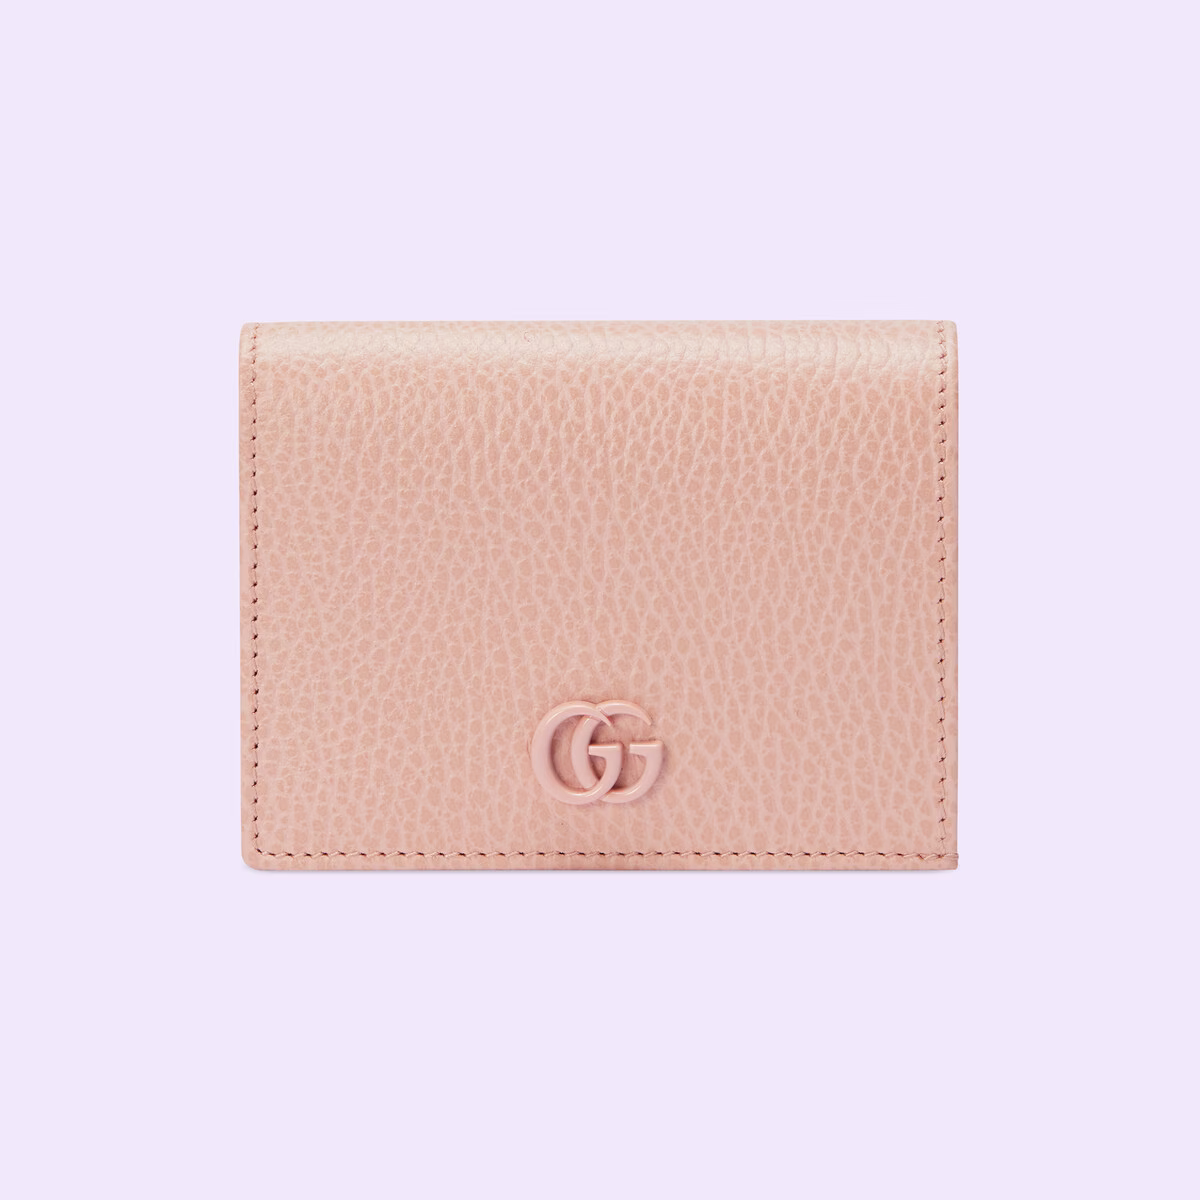 100% Brand new Gucci GG Marmont card case